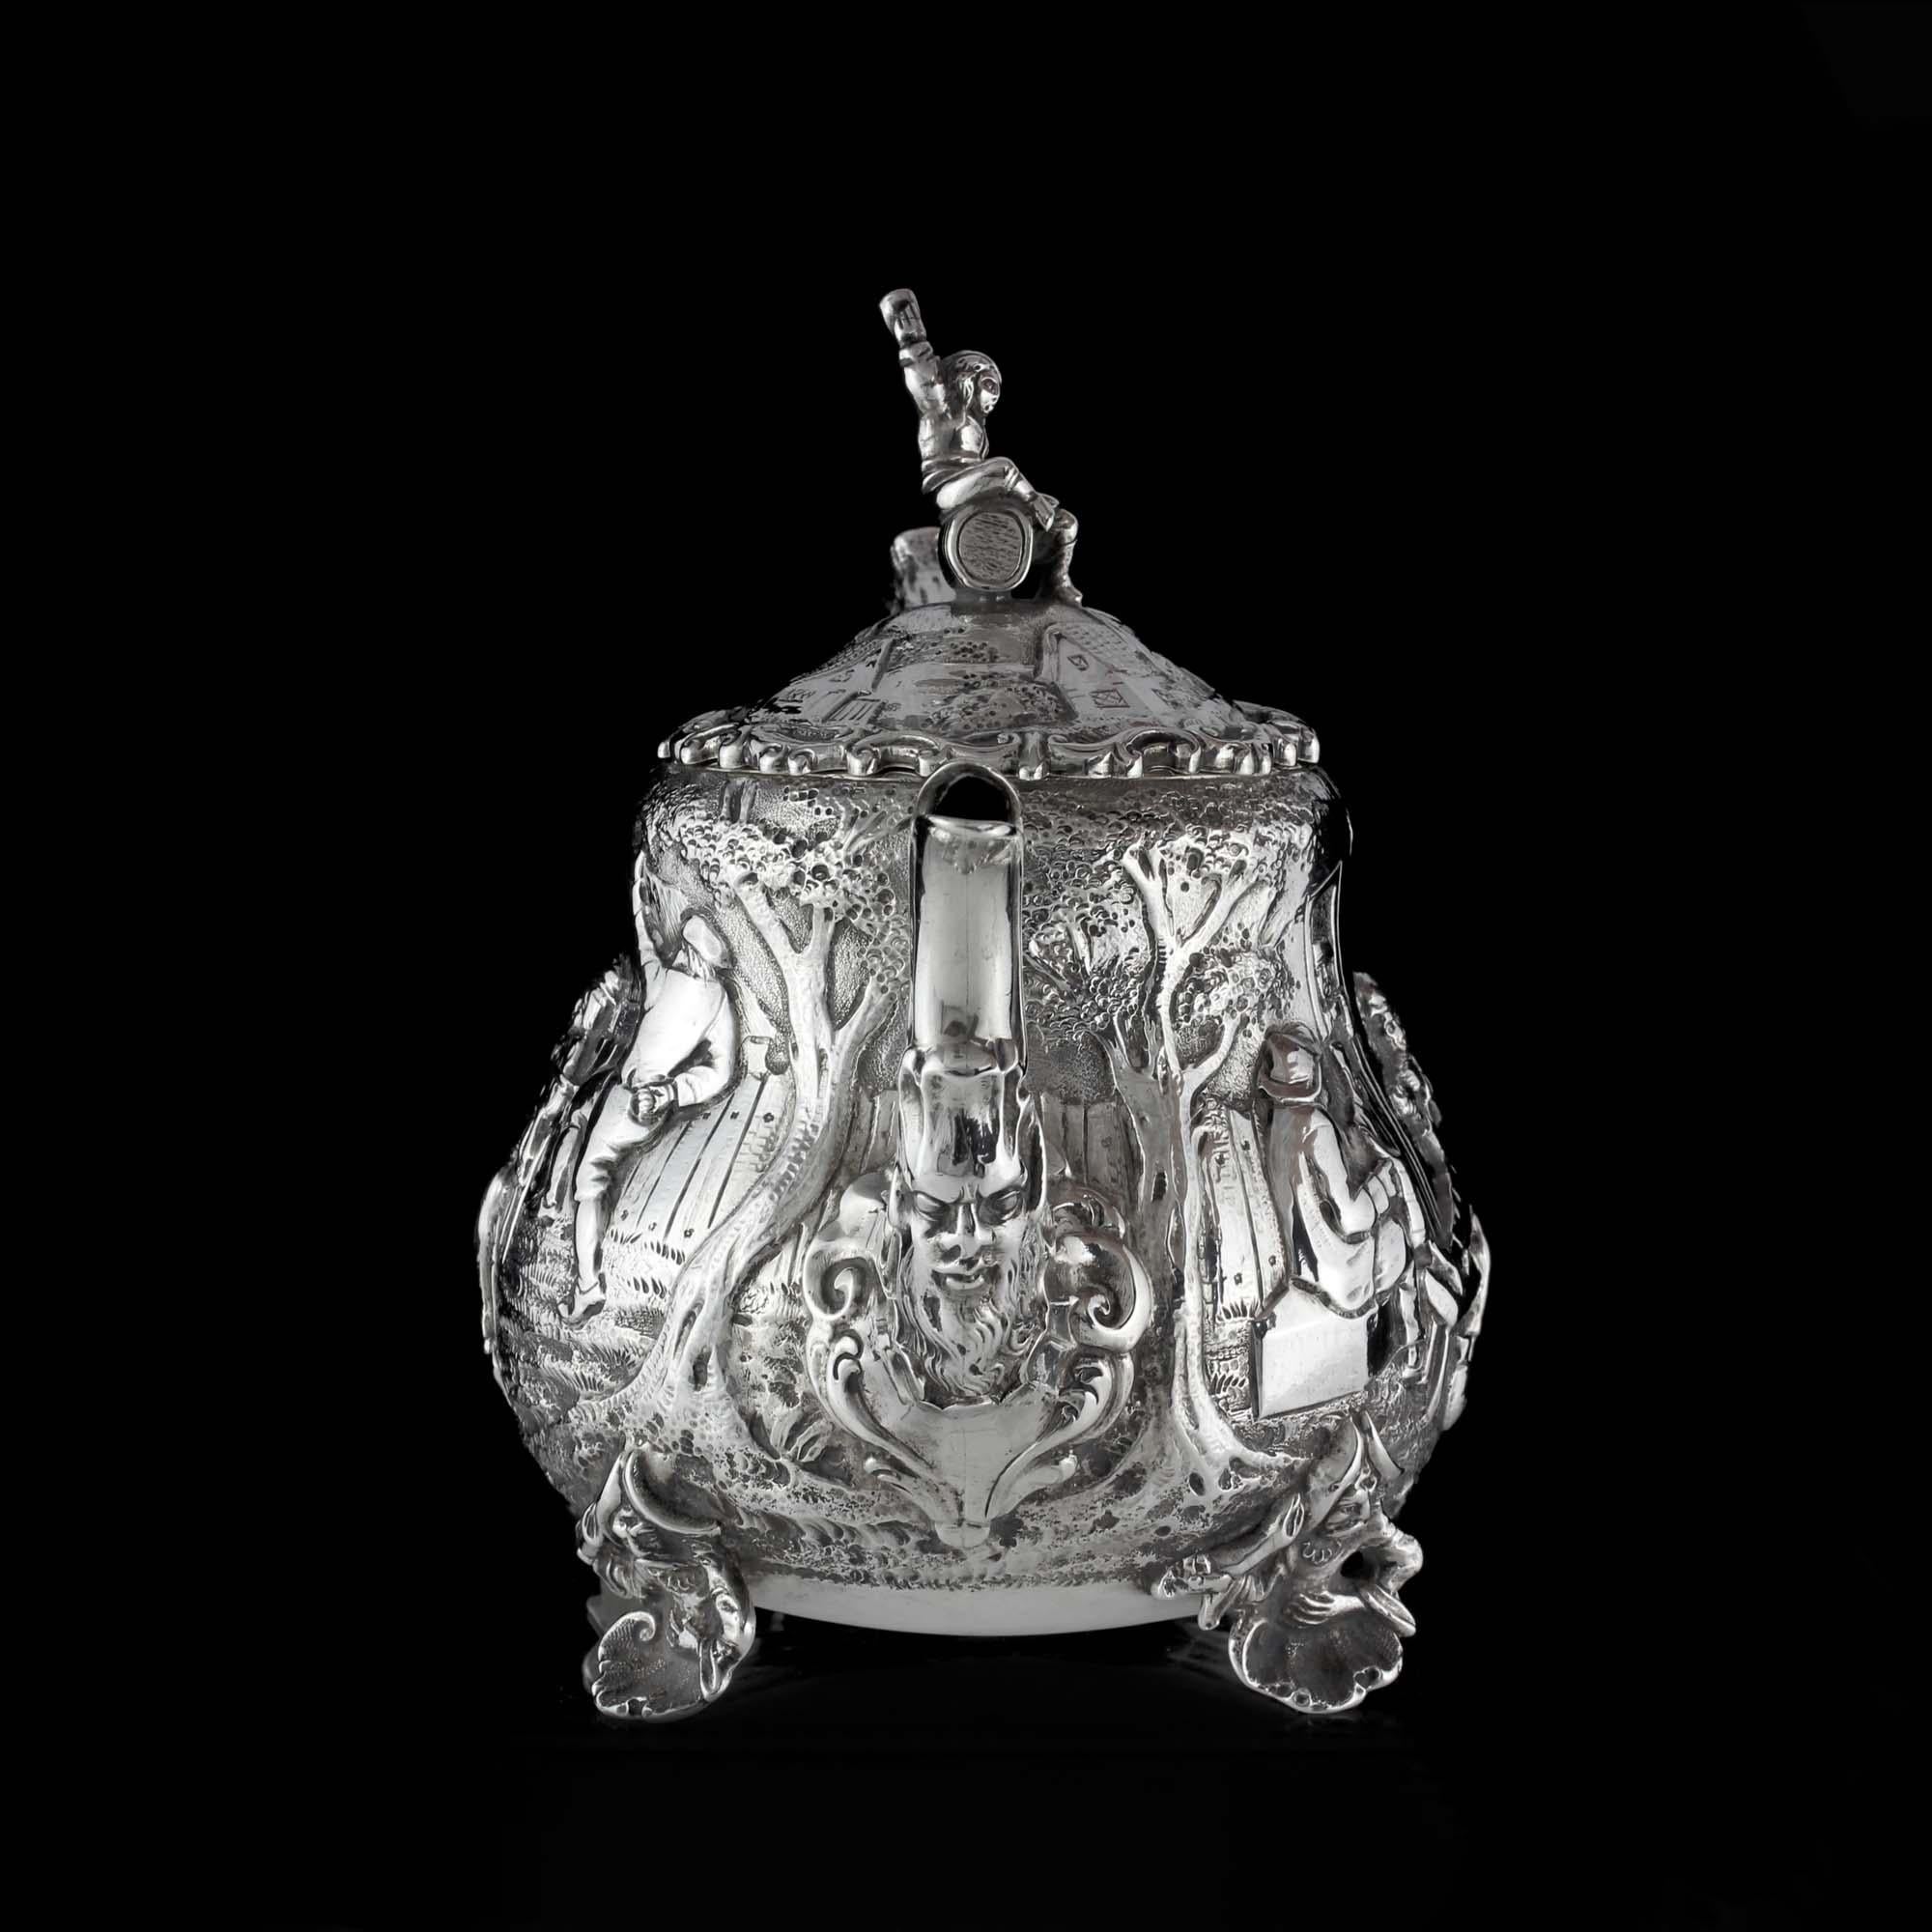 An Antique late Victorian sterling silver bachelor teapot with engravings inspired by David Teniers. David Teniers was a Dutch Baroque painter (1610-1690).  He was an innovator in a wide range of genres. Teniers is particularly known for developing